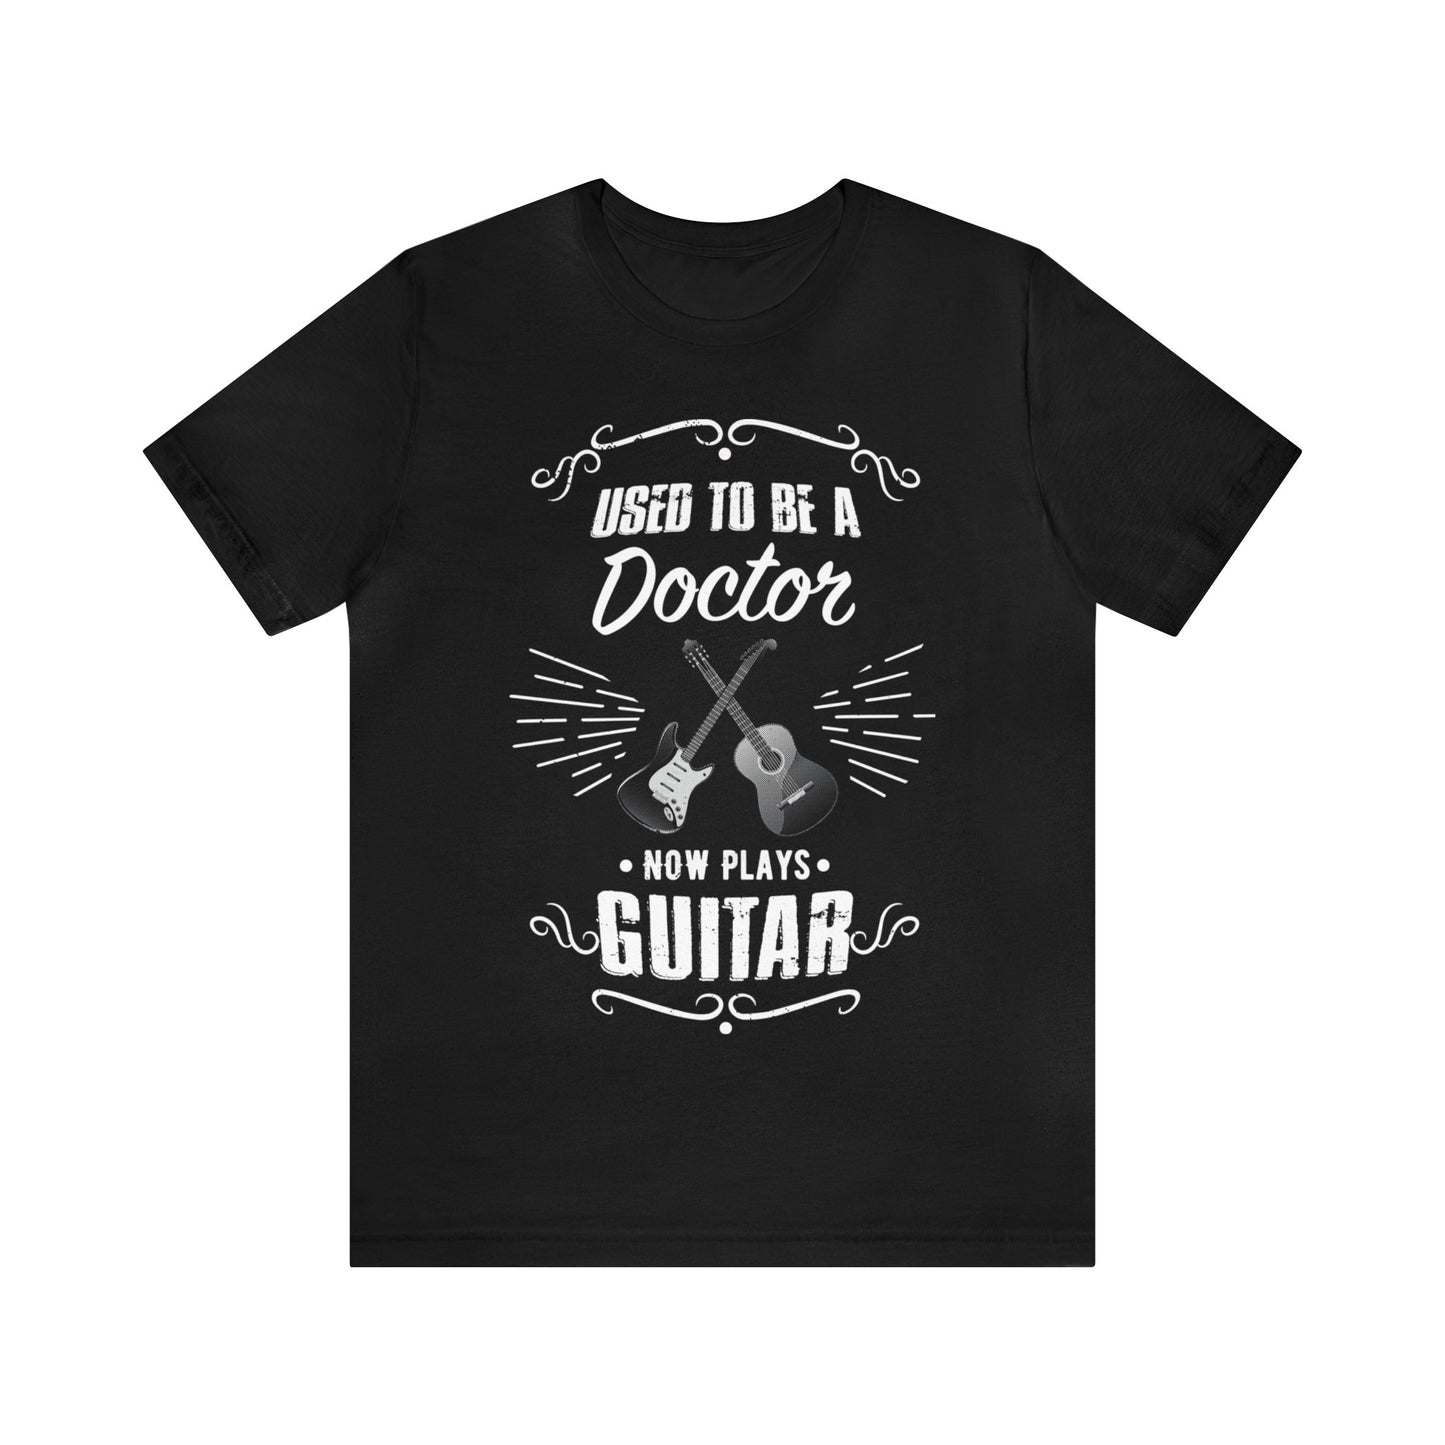 Used to be a DOCTOR; Now Plays GUITAR - Funny Retirement Gift, Unisex T-shirt Bella+Canvas 3001, dark shirt colors for amateur musician/guitar player